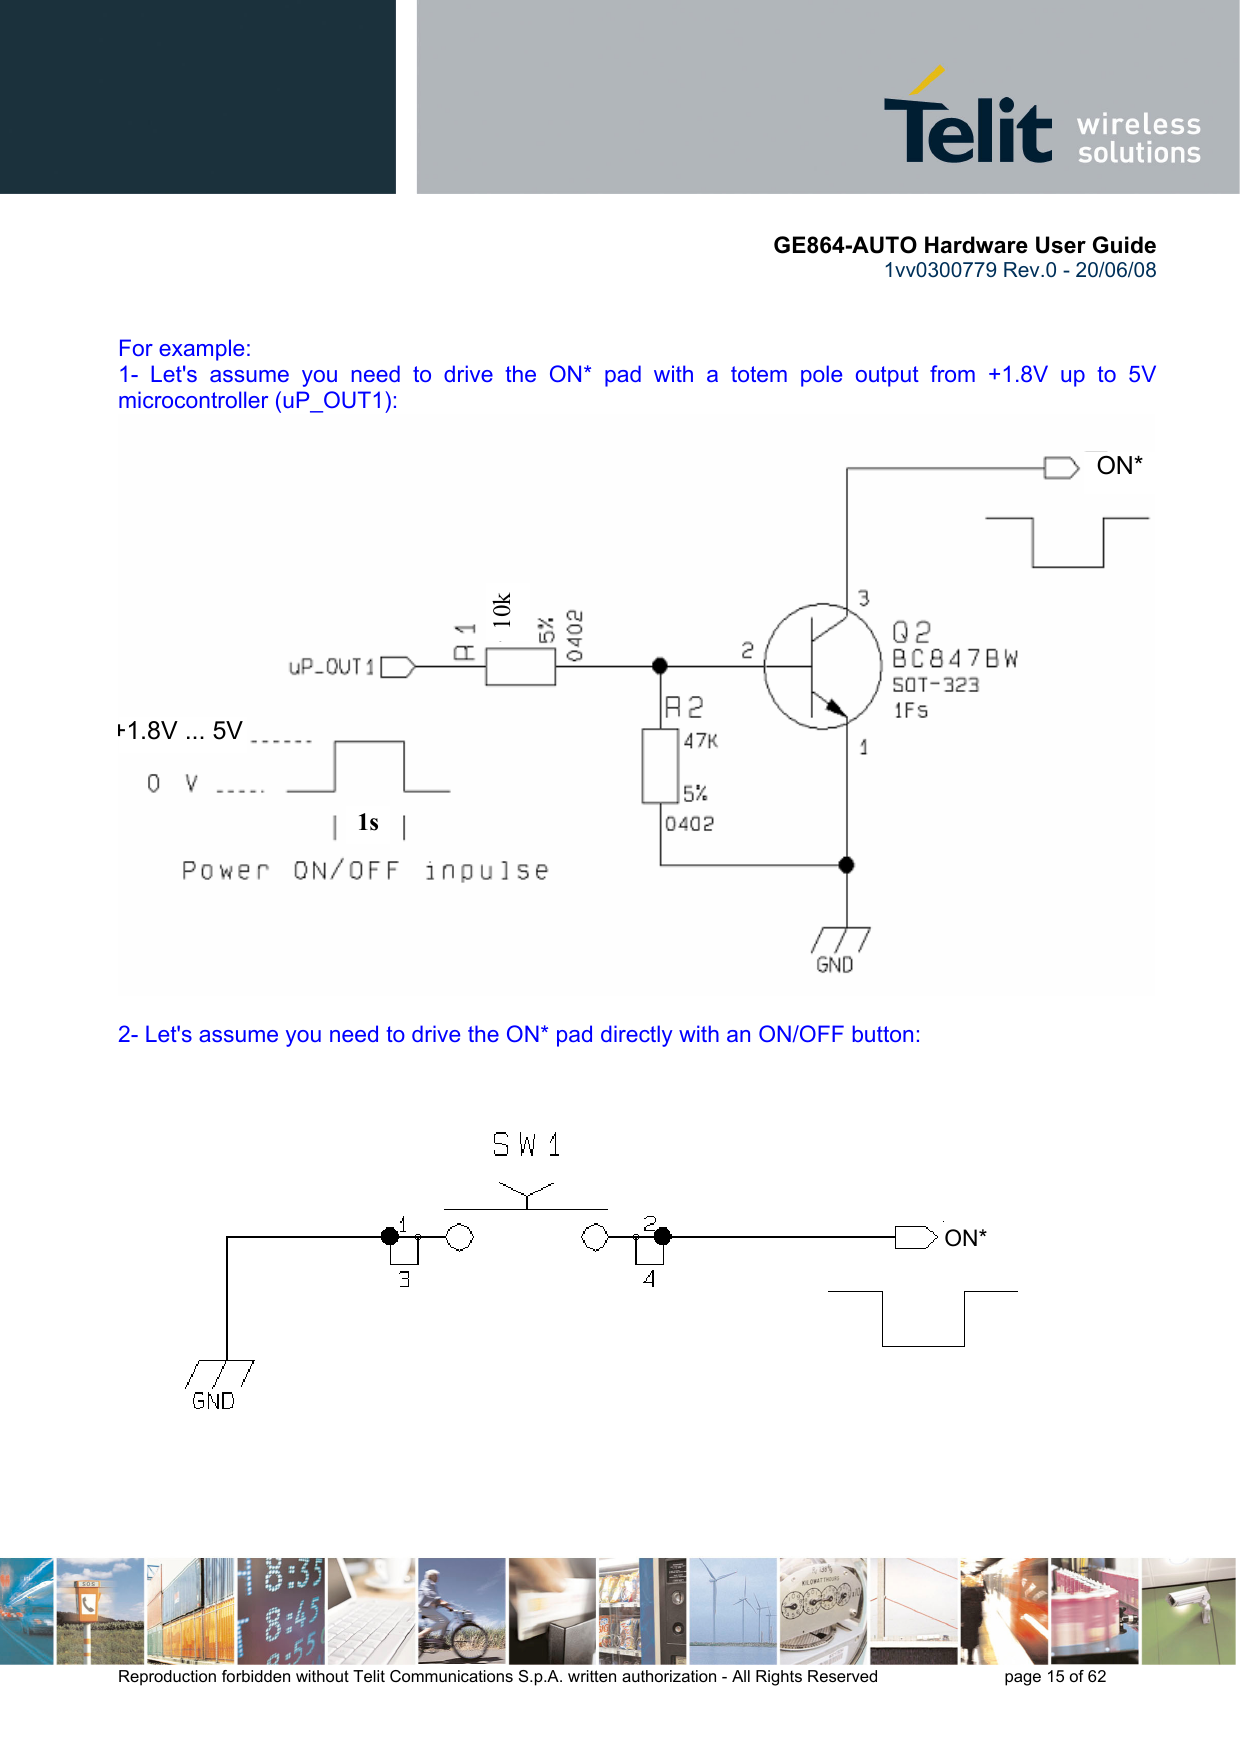       GE864-AUTO Hardware User Guide 1vv0300779 Rev.0 - 20/06/08      Reproduction forbidden without Telit Communications S.p.A. written authorization - All Rights Reserved    page 15 of 62    For example: 1- Let&apos;s assume you need to drive the ON* pad with a totem pole output from +1.8V up to 5V microcontroller (uP_OUT1):  2- Let&apos;s assume you need to drive the ON* pad directly with an ON/OFF button:   1s10k   ON*+1.8V ... 5V    ON* 